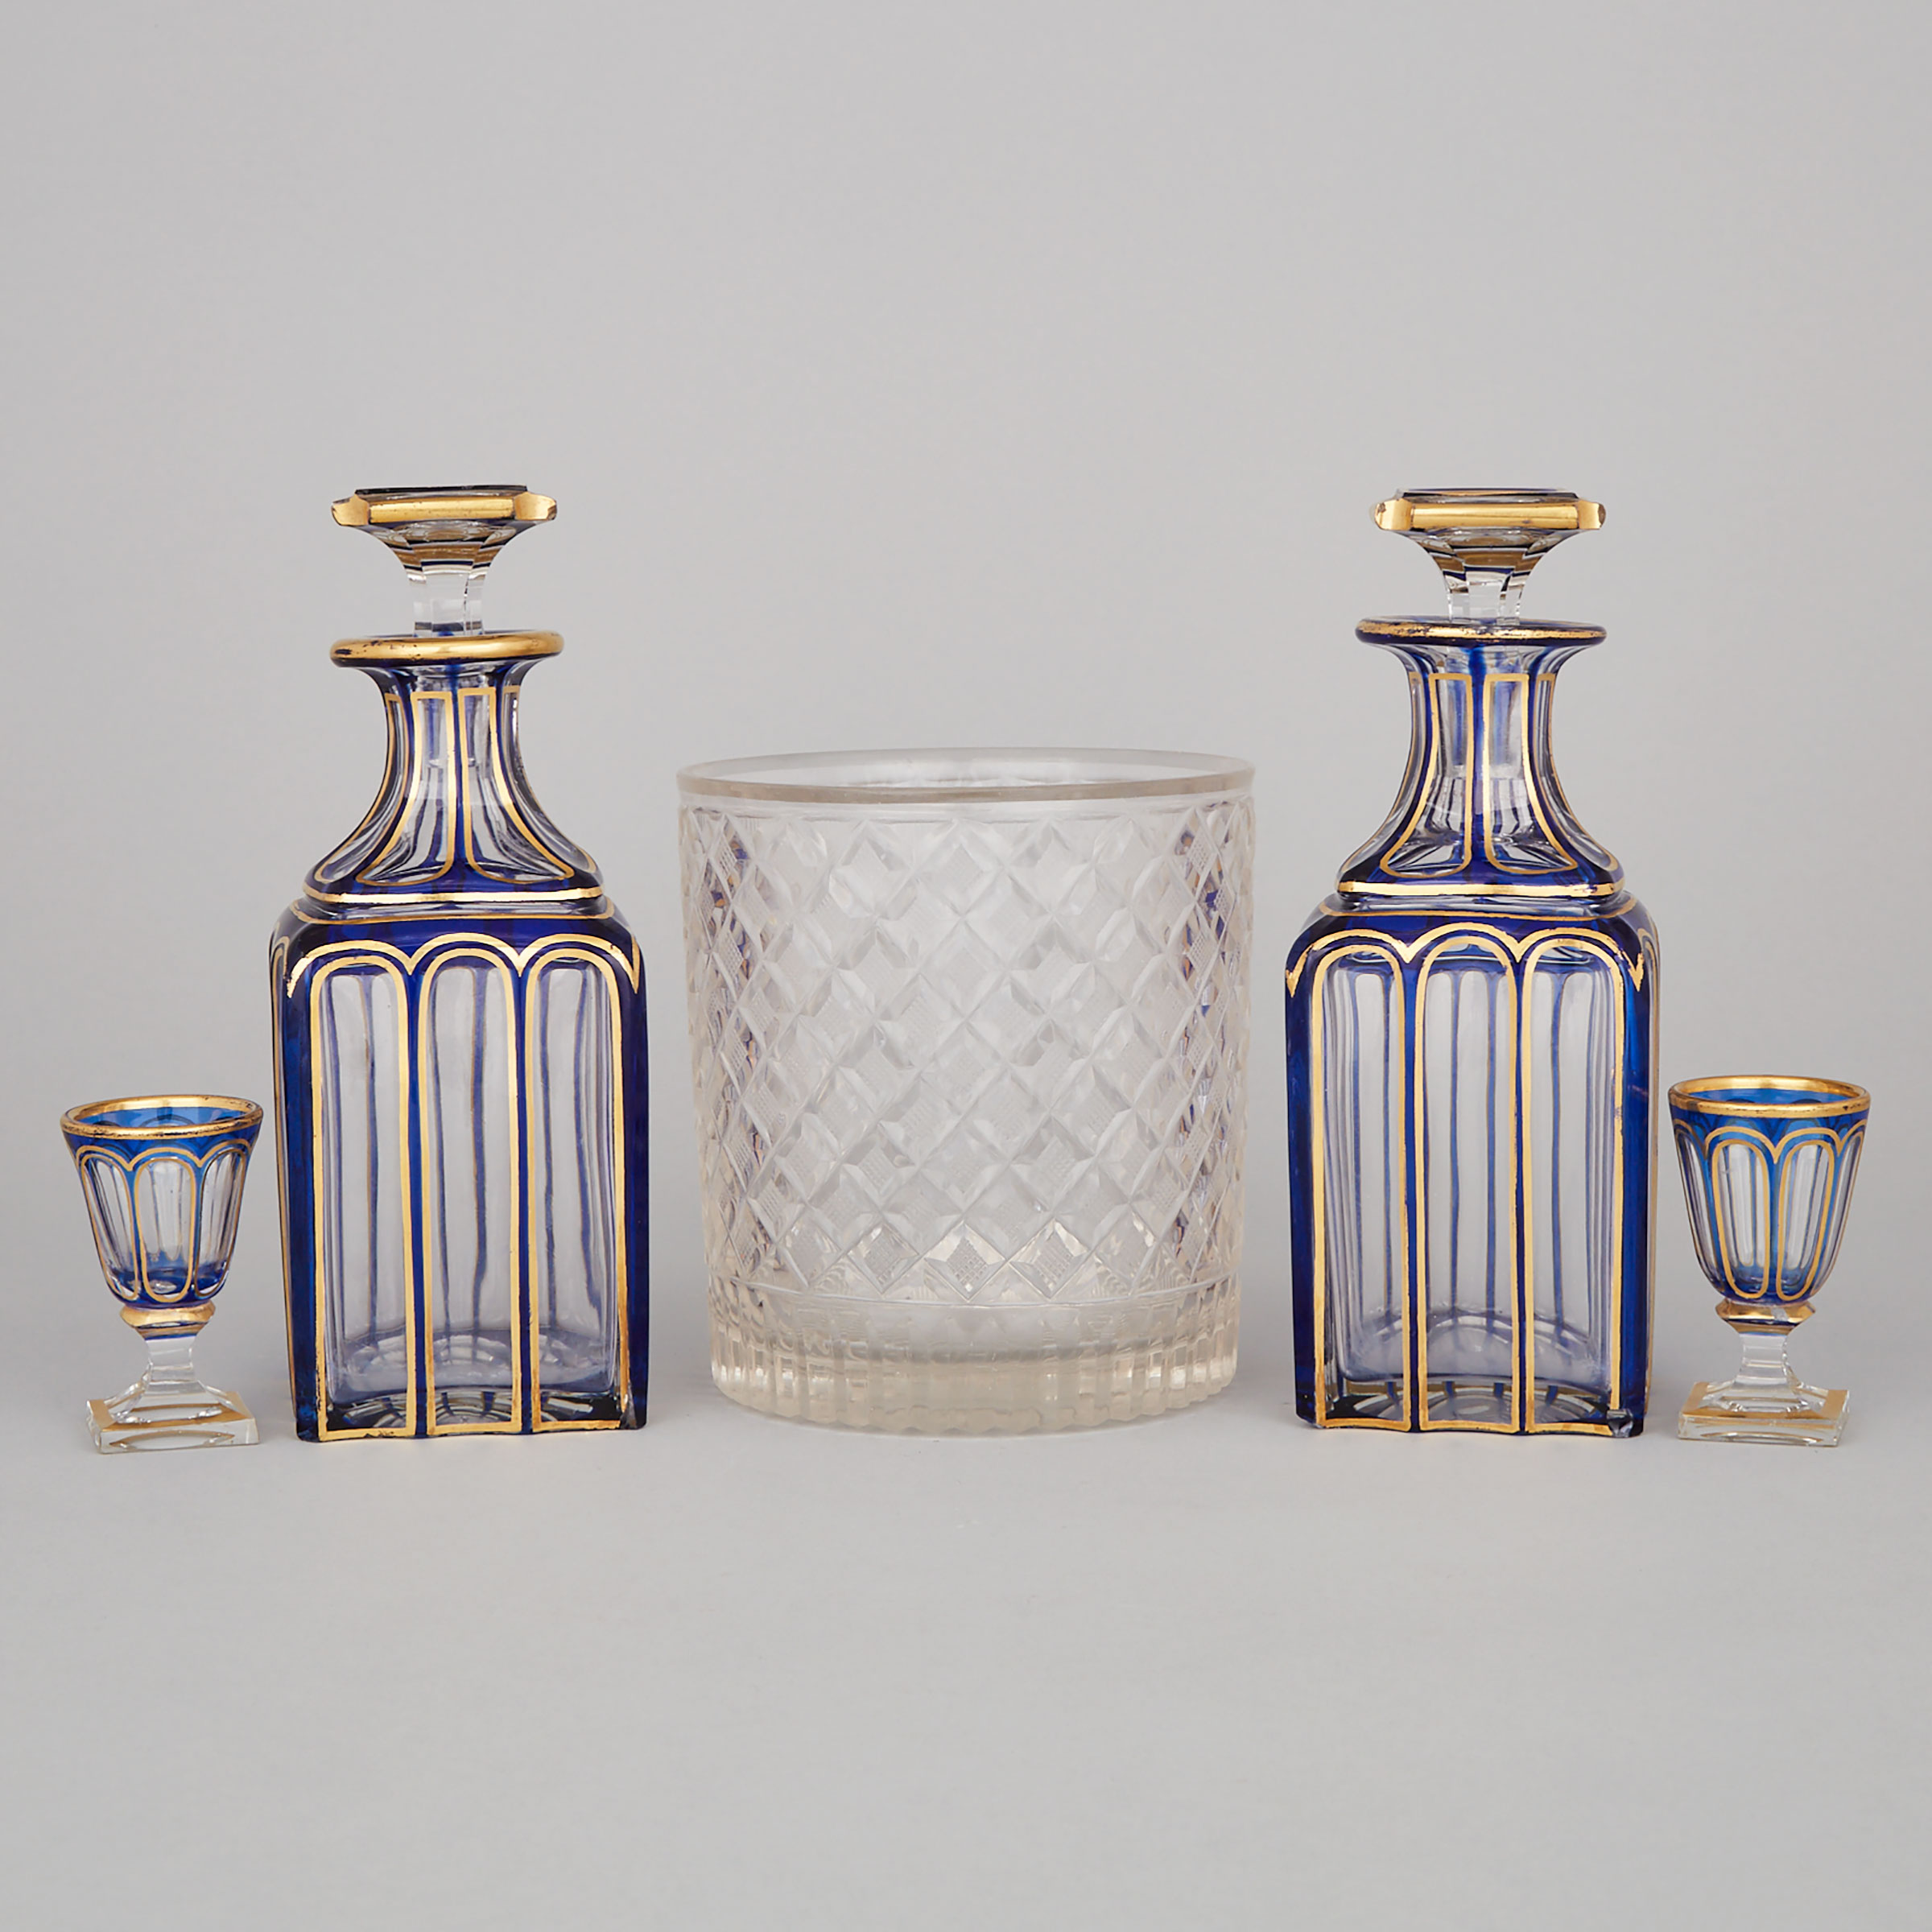 Pair of Bohemian Blue Overlaid and Gilt Glass Decanters with Stoppers and Two Glasses and a Cut Glass Ice Bucket, 20th century